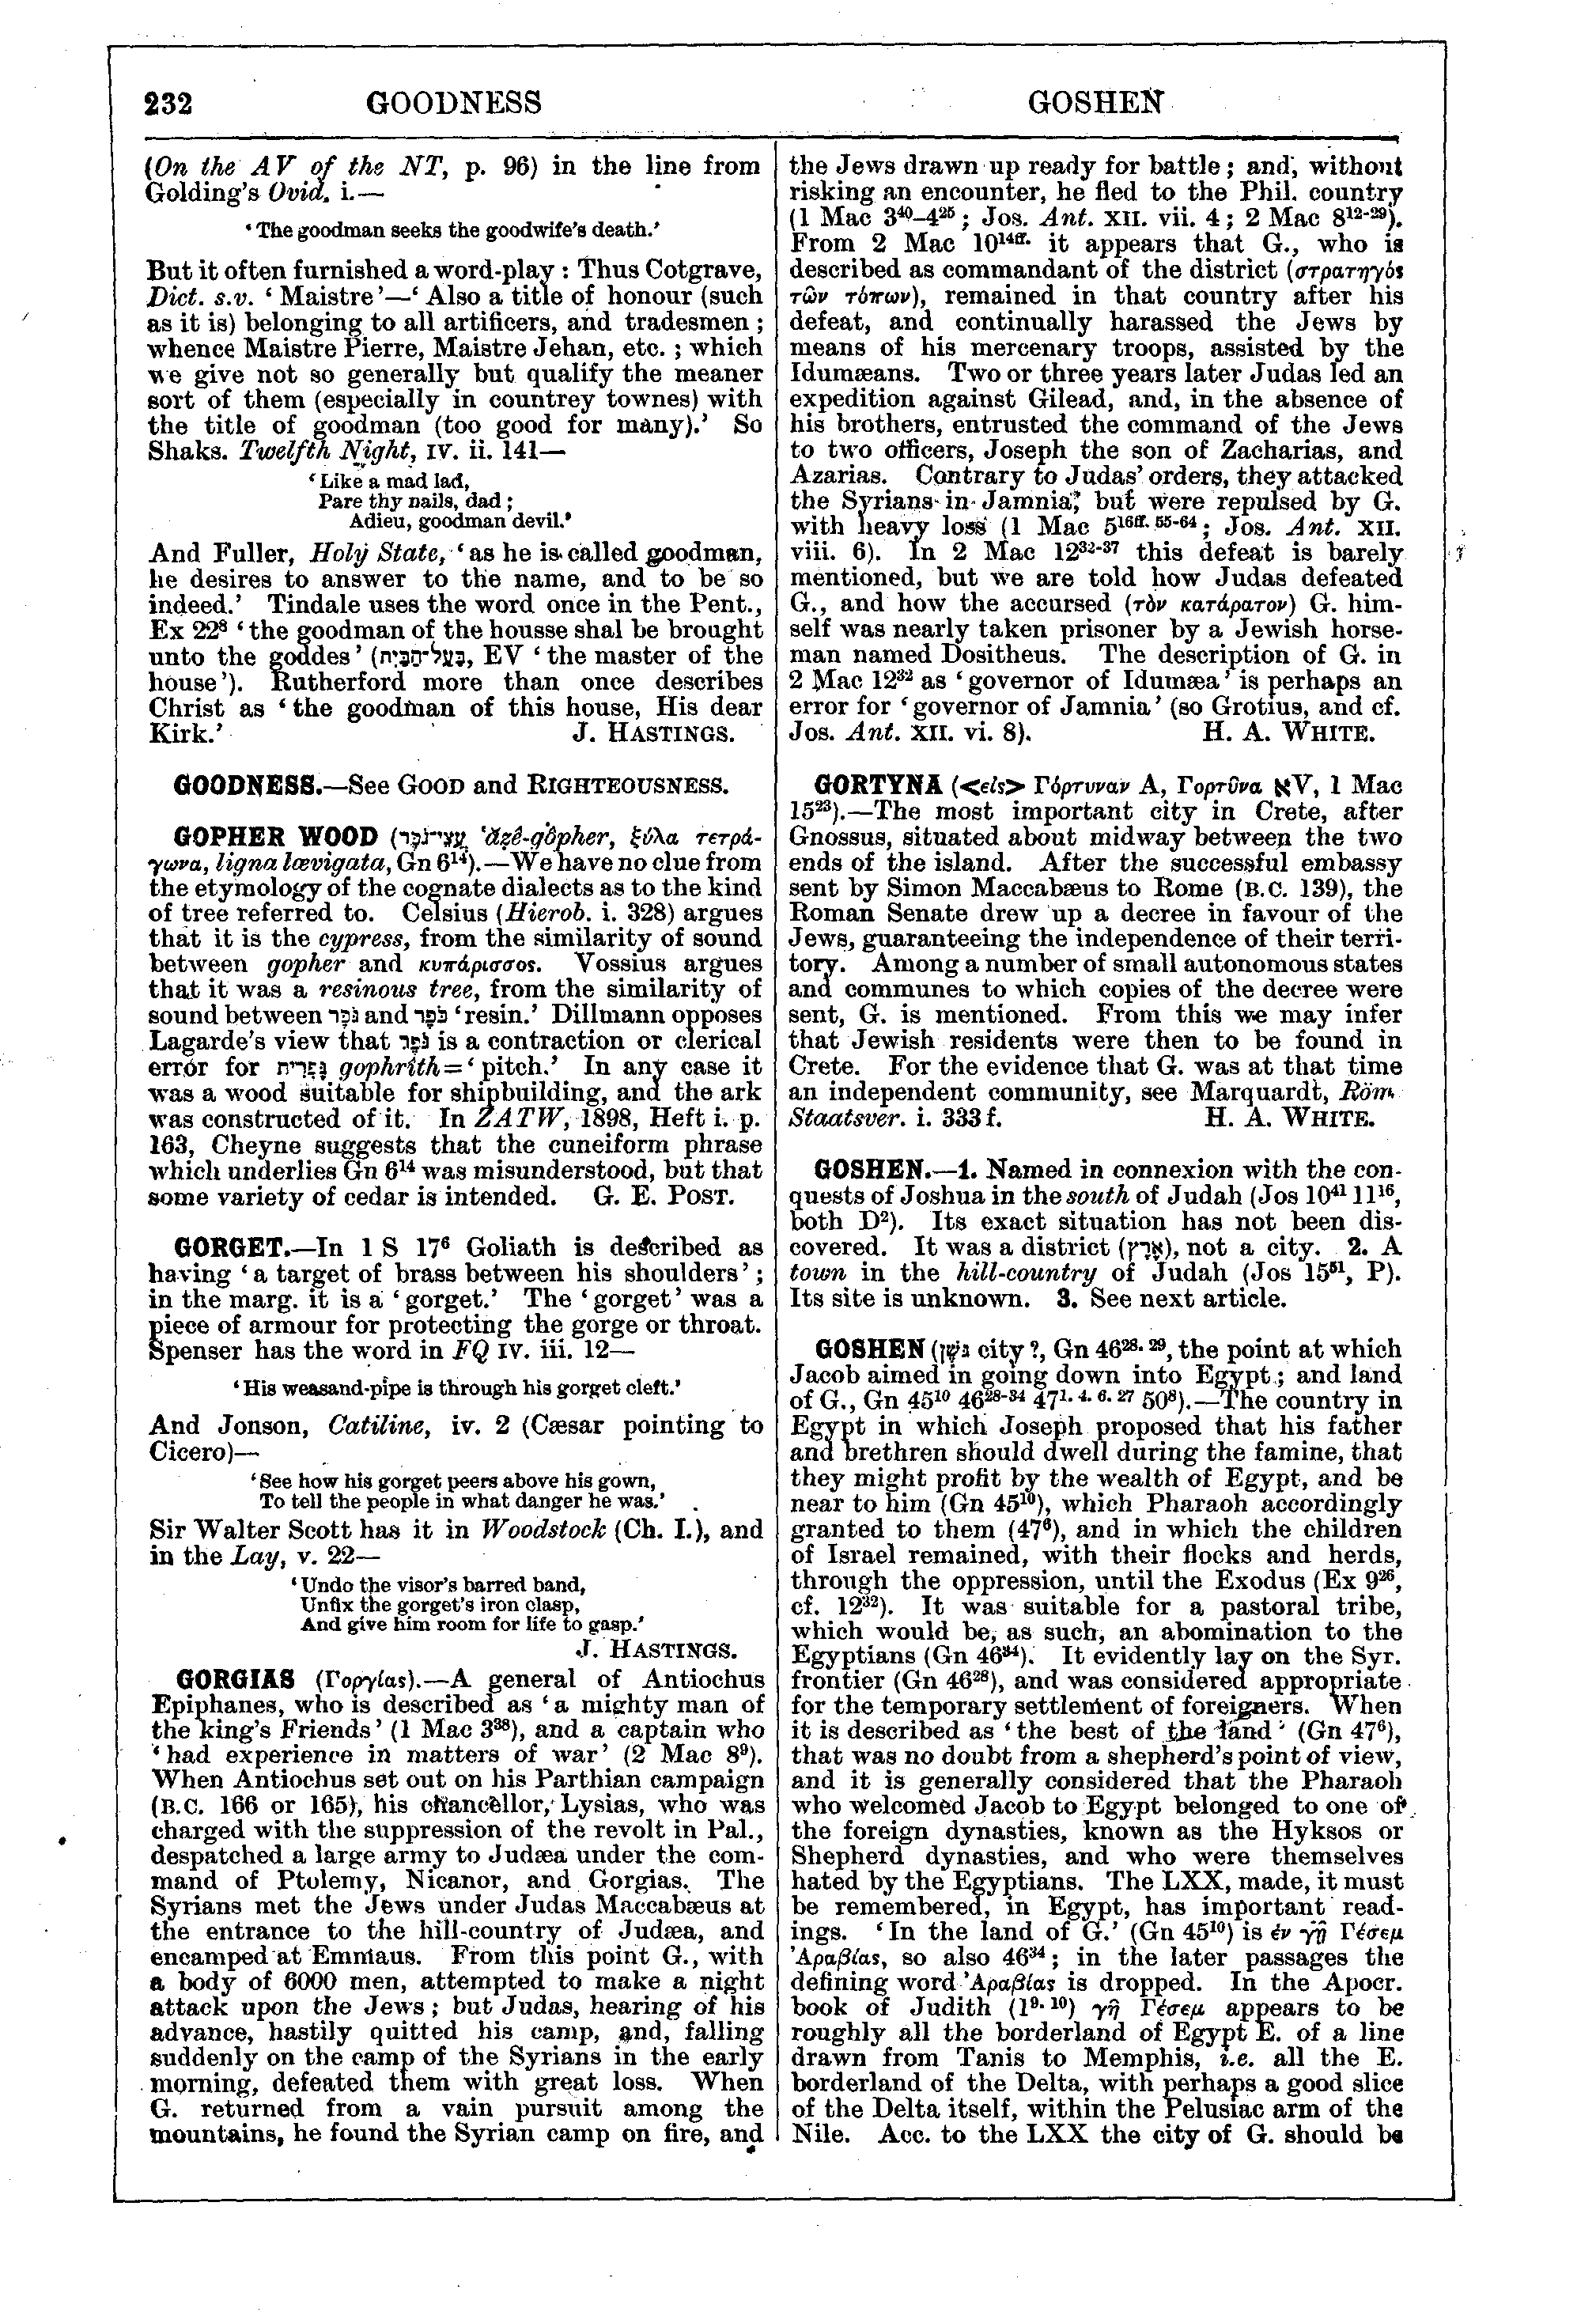 Image of page 232